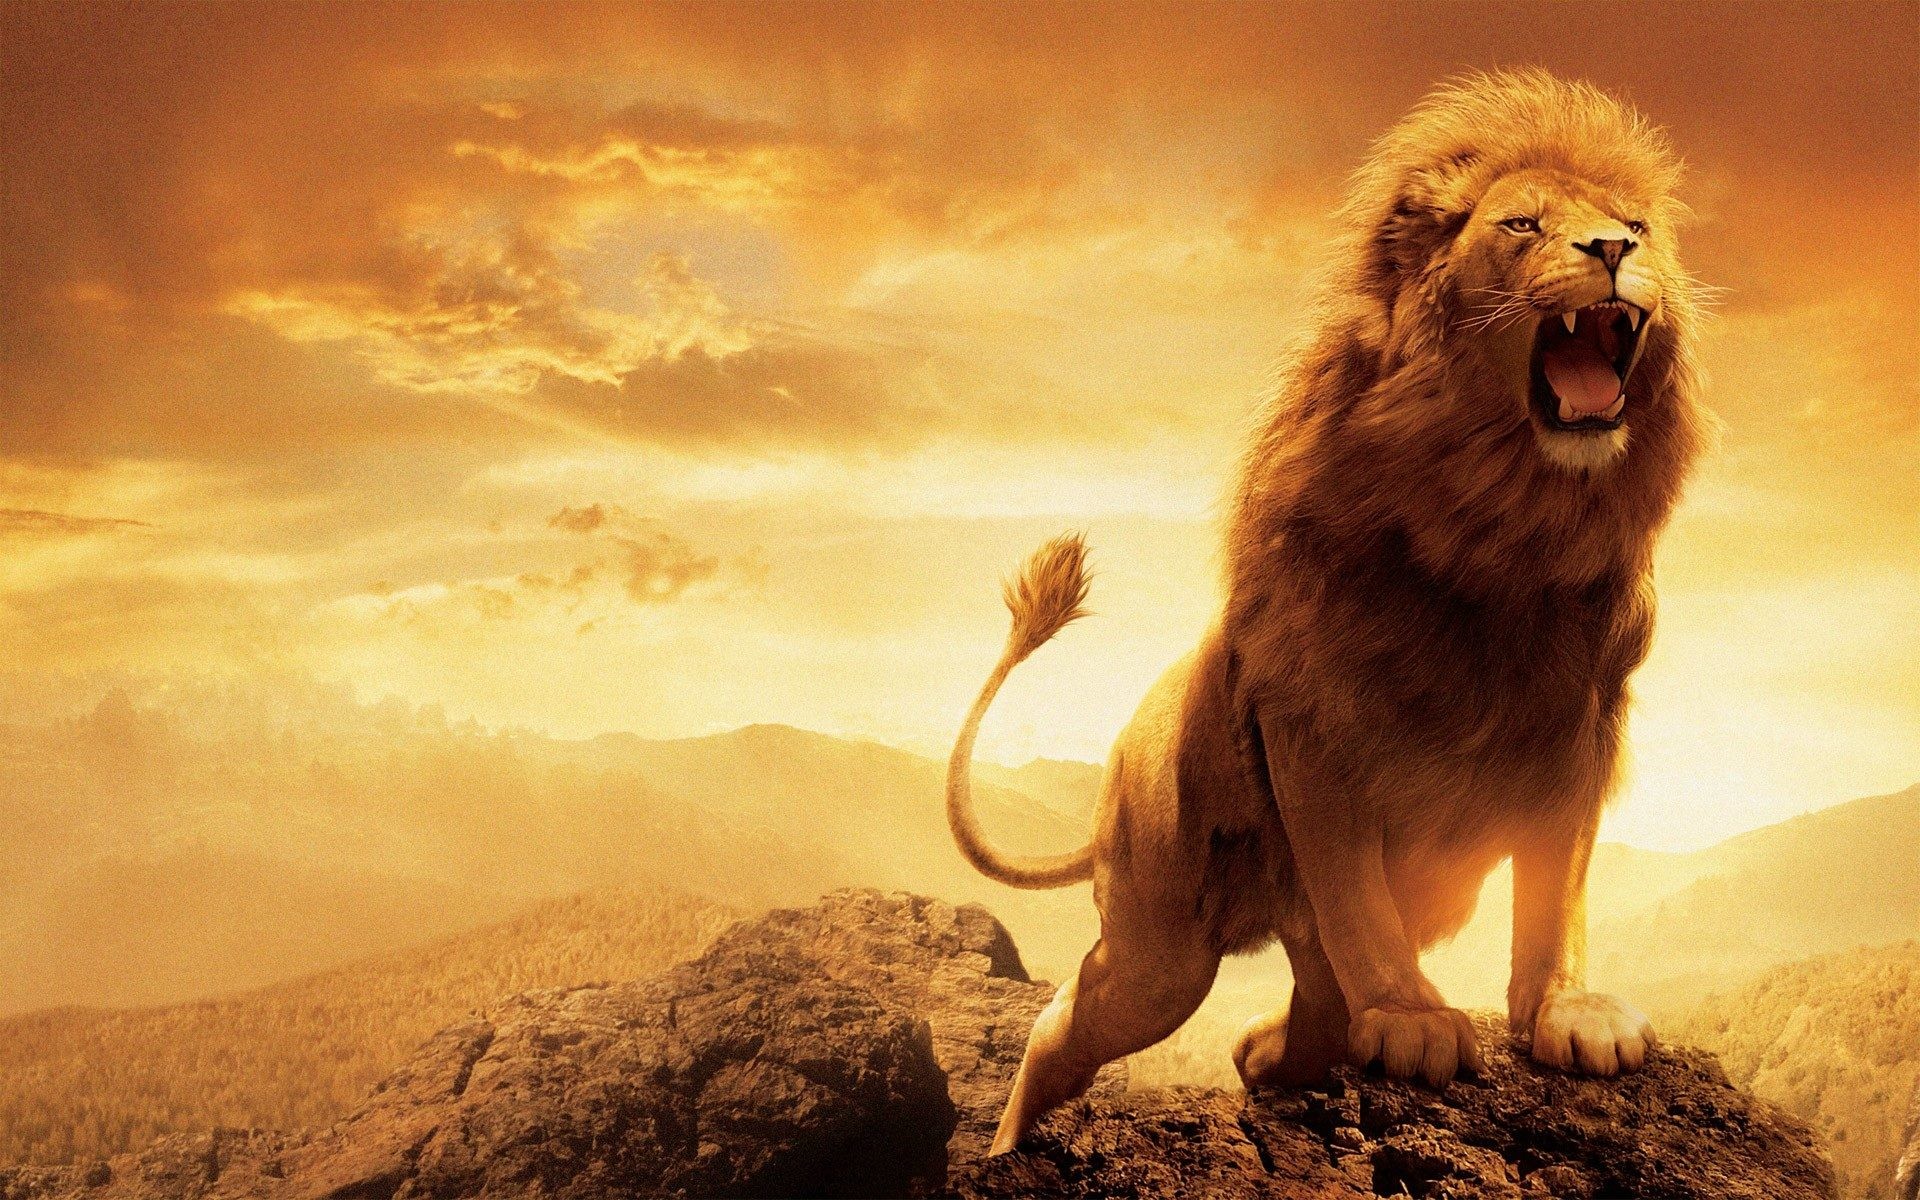 Lion Wallpaper Hd Pictures One Hd Wallpaper Pictures - Lion Of Judah  Roaring - 1920x1200 Wallpaper 